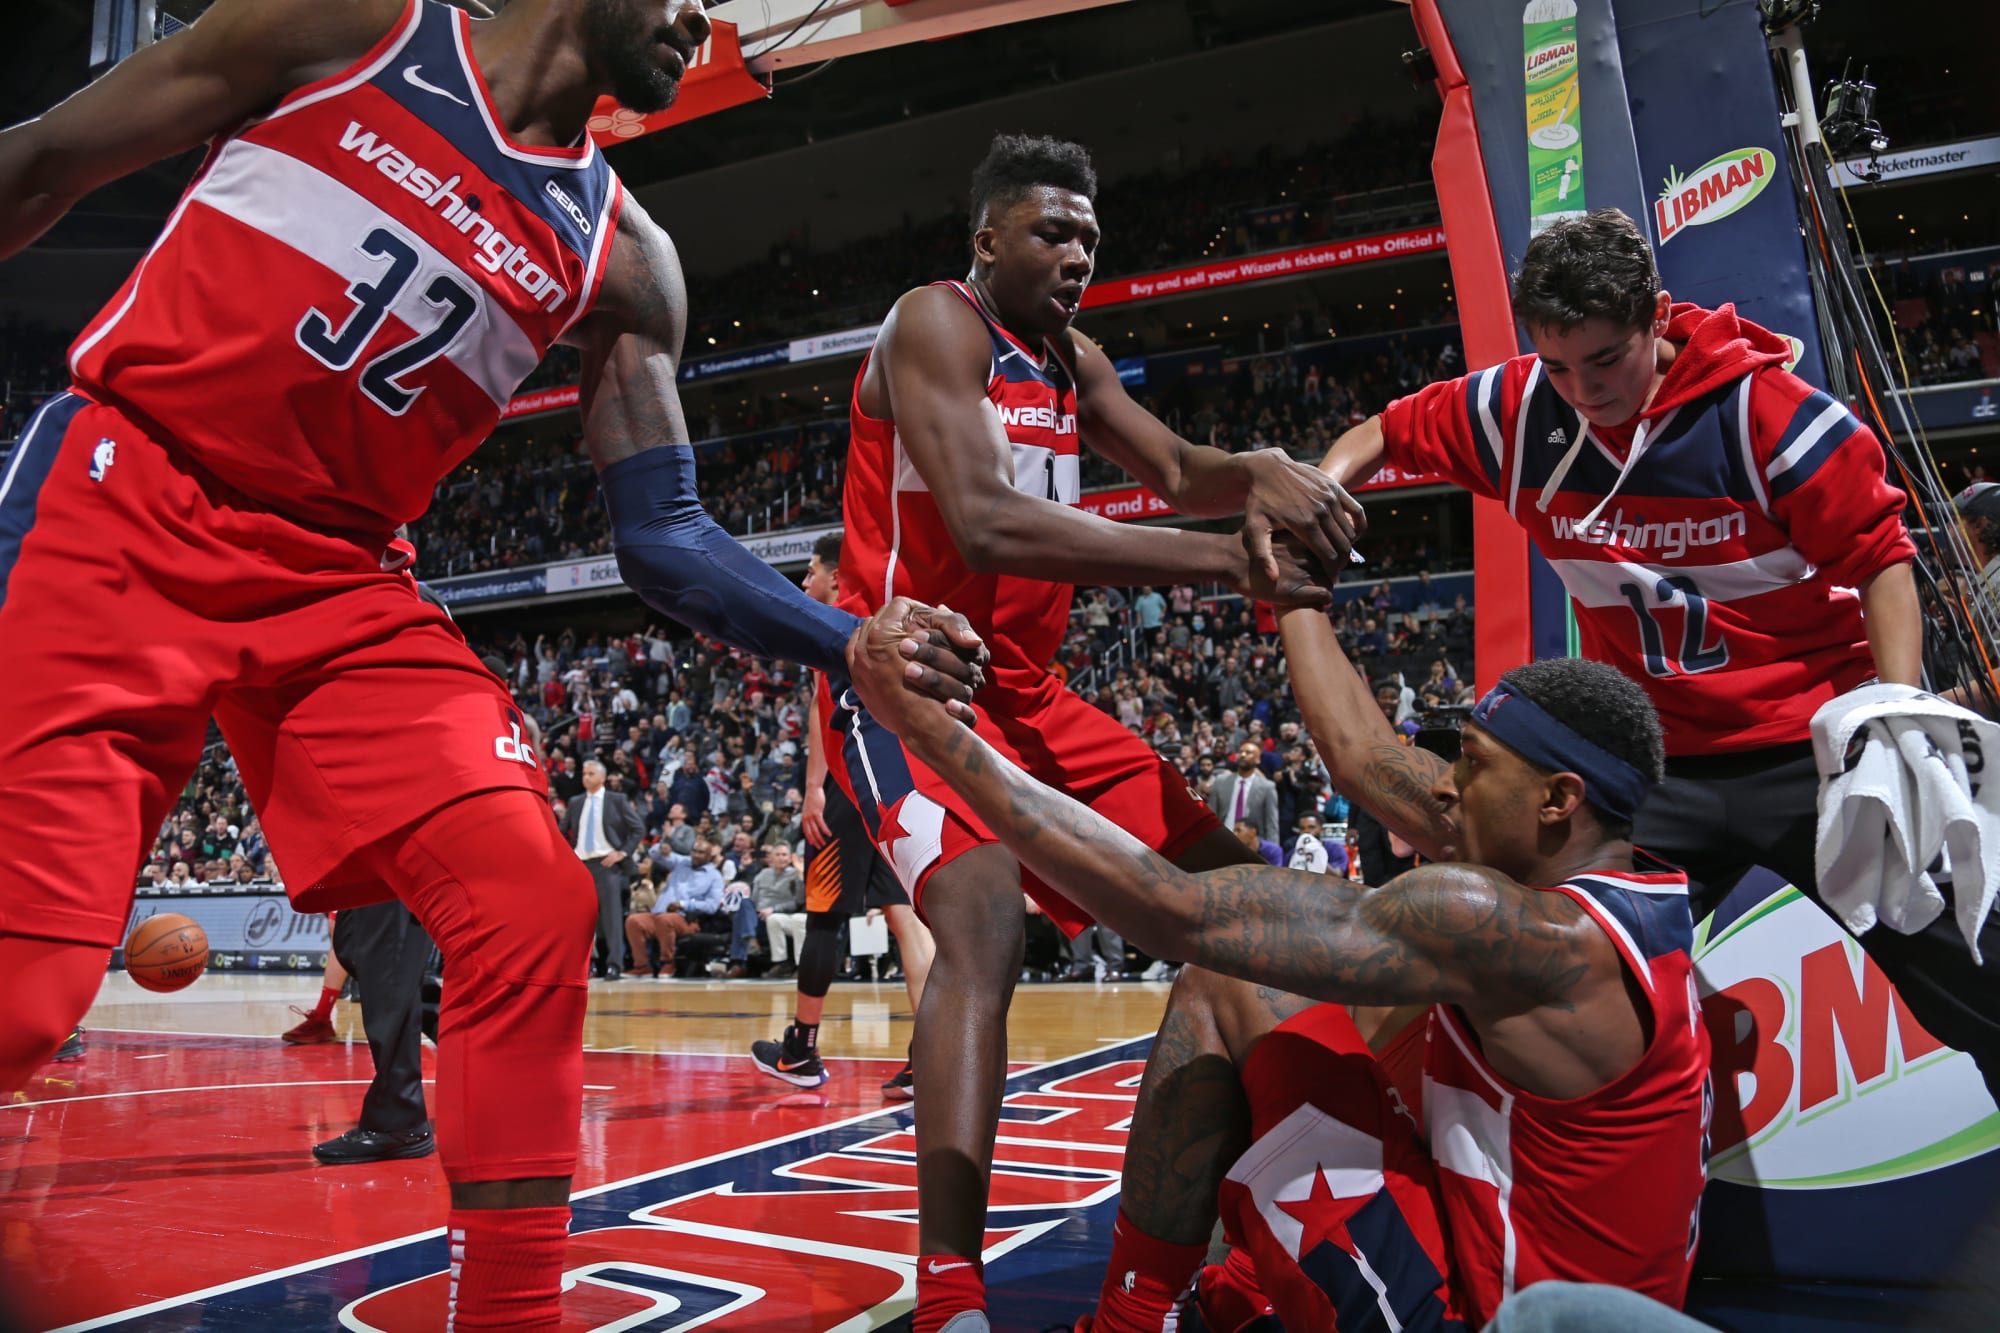 Washington Wizards The next 10 games will decide if the Wizards have